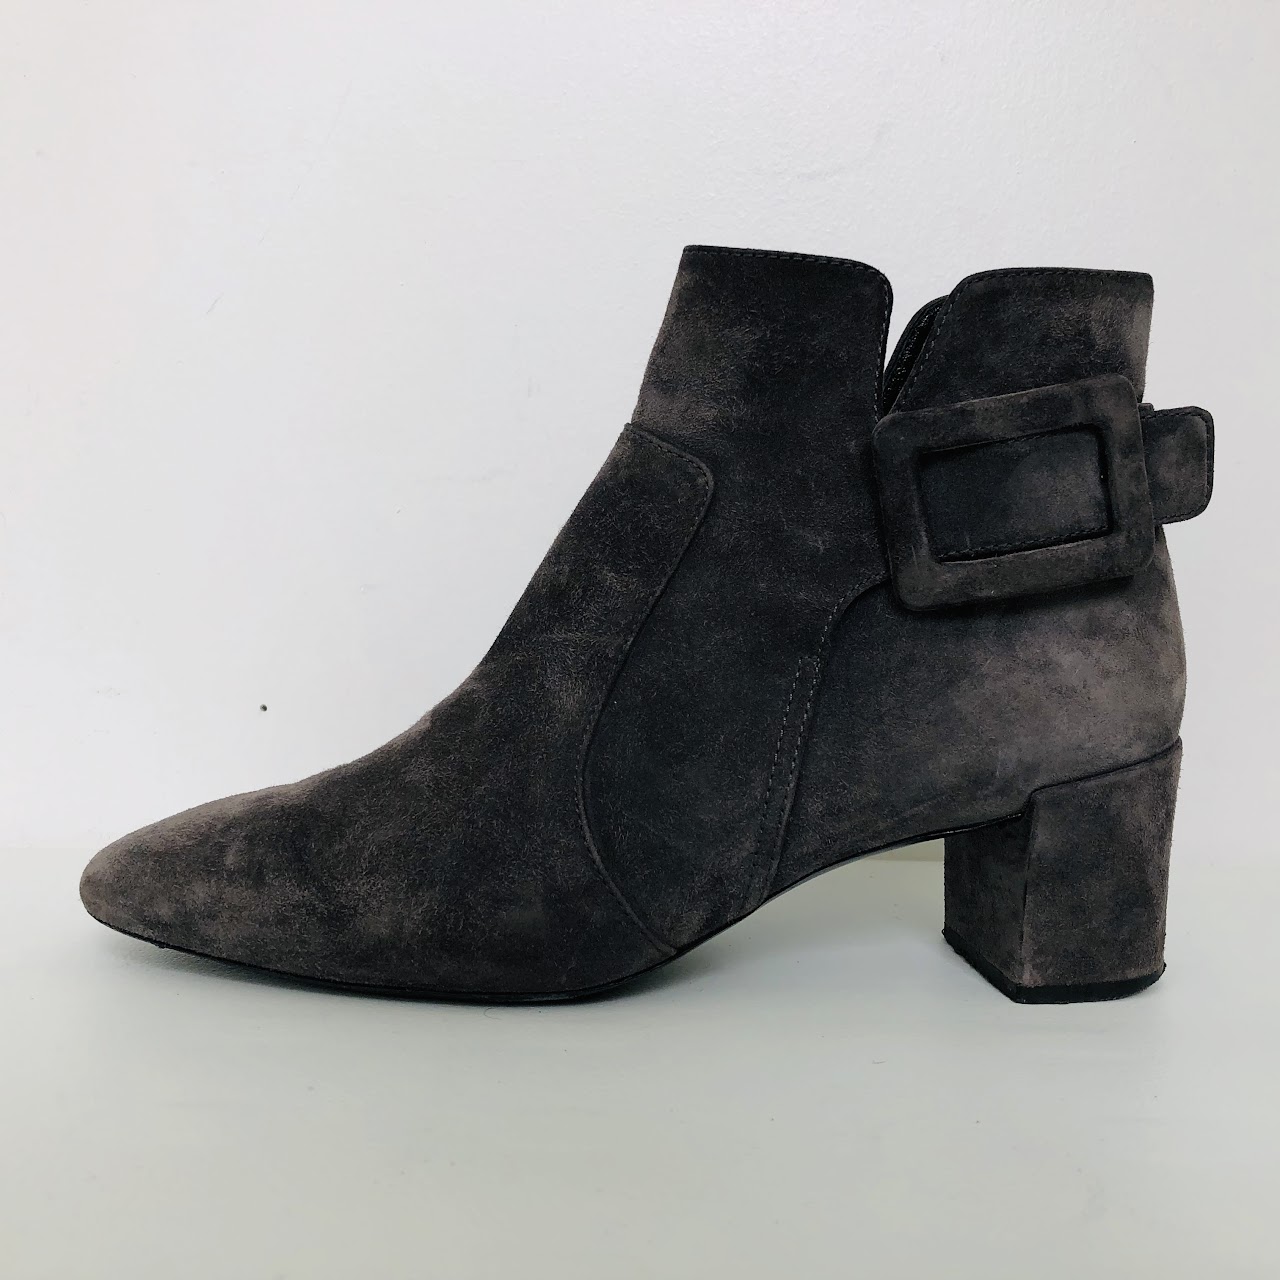 Roger Vivier Suede Leather Ankle Boots